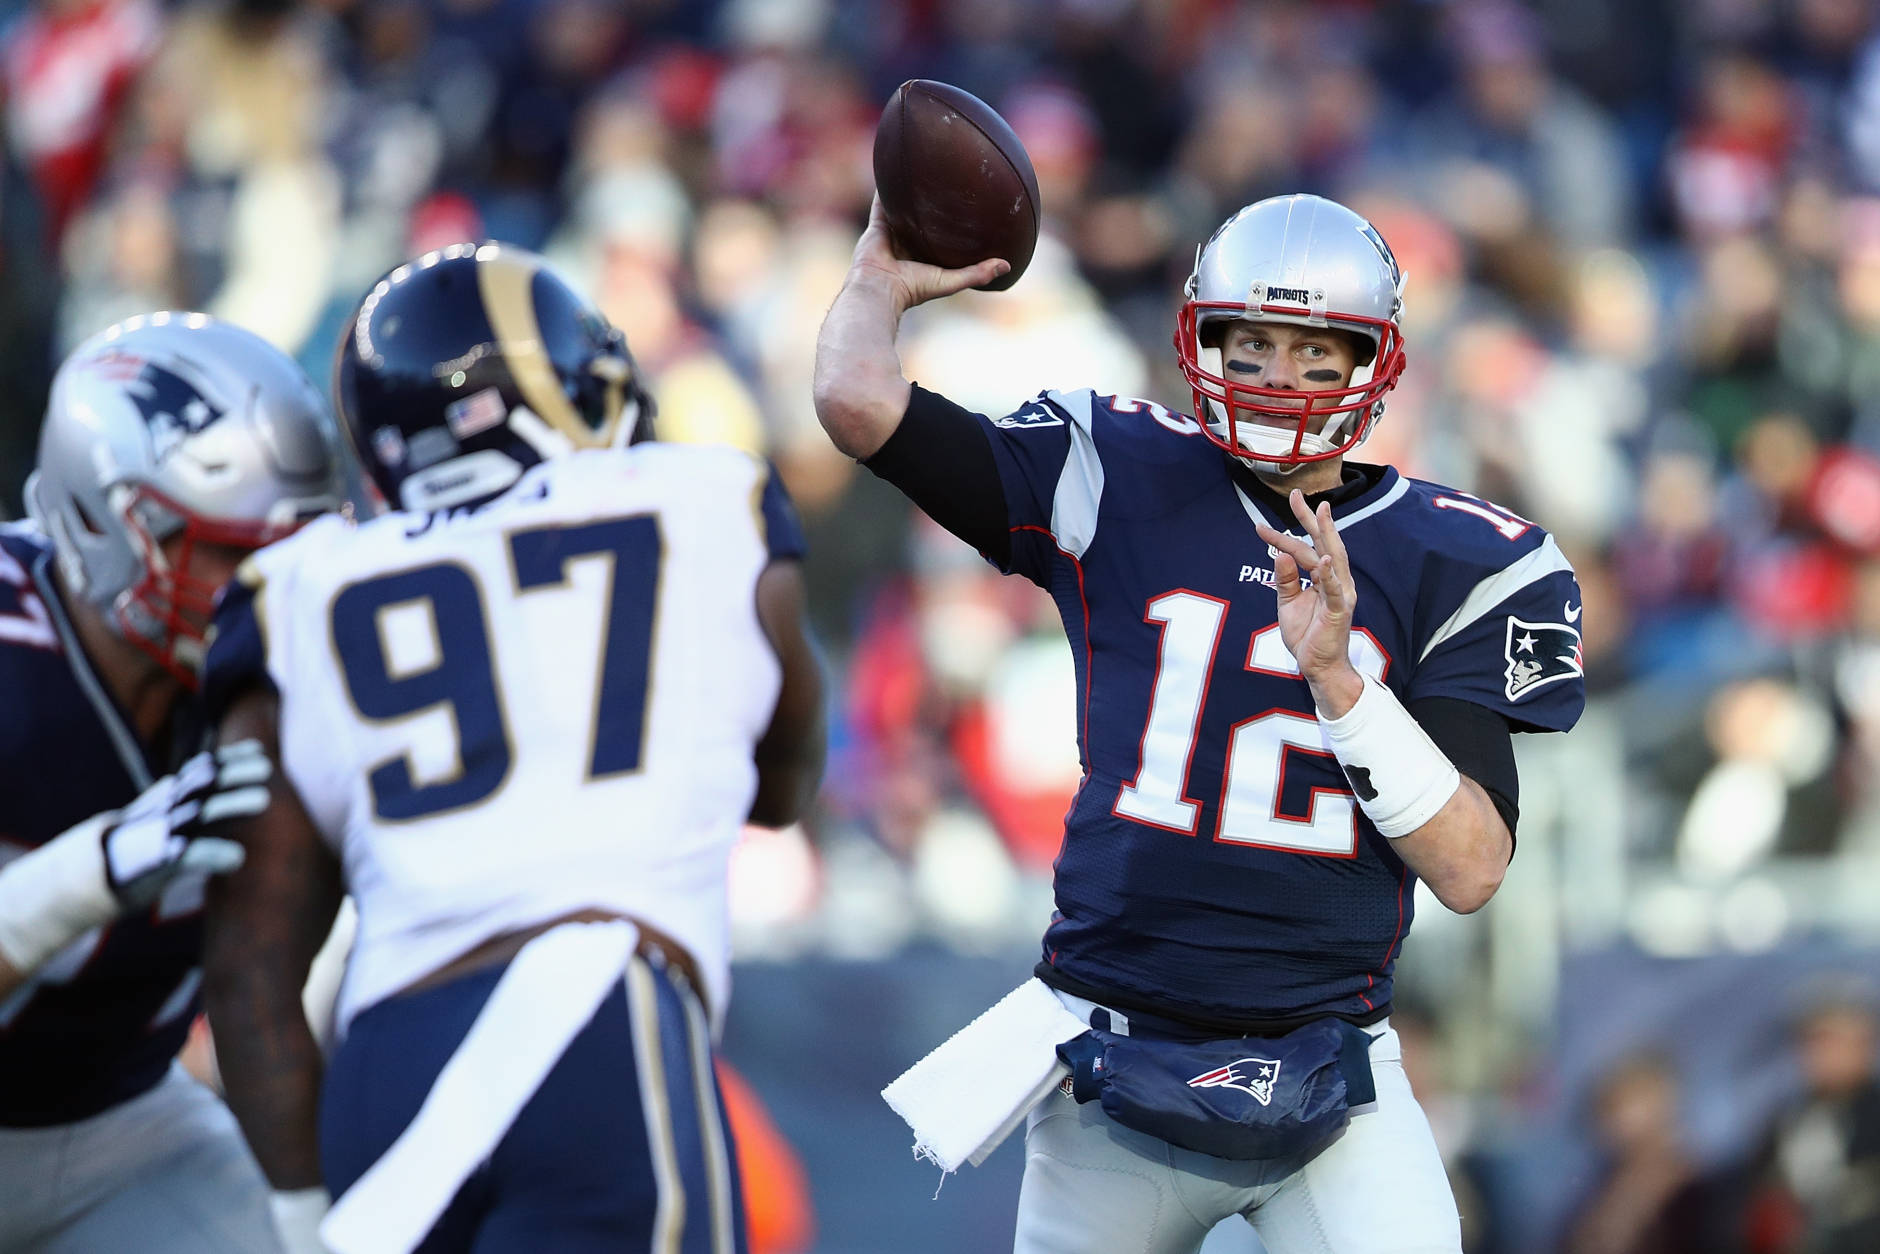 FOXBORO, MA - DECEMBER 04:  Tom Brady #12 of the New England Patriots throws a pass during the second half against the Los Angeles Rams at Gillette Stadium on December 4, 2016 in Foxboro, Massachusetts.  (Photo by Maddie Meyer/Getty Images)